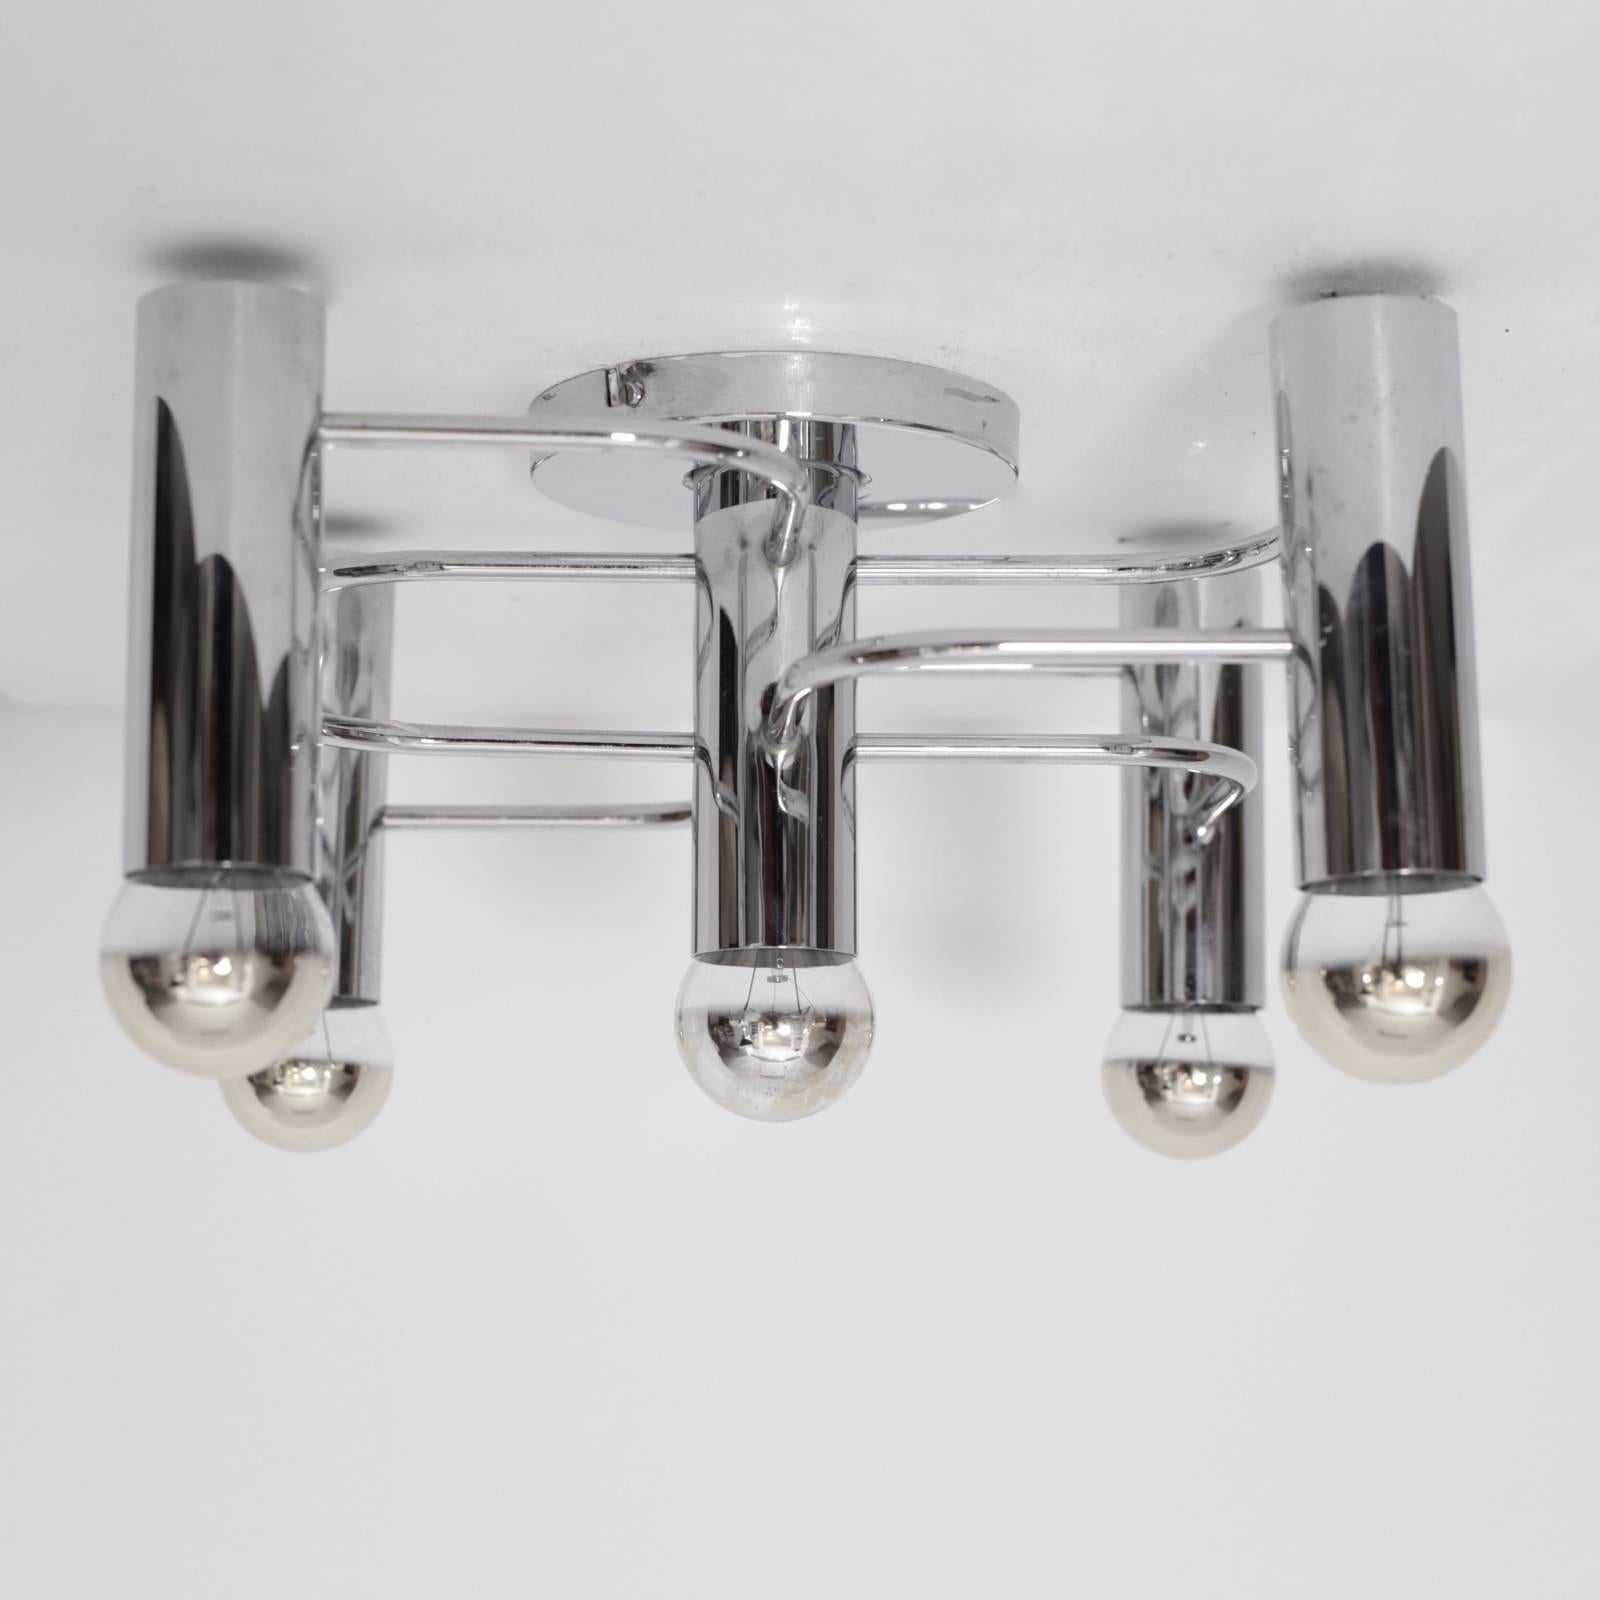 Stunning five-light flush mount, wall or ceiling lamp. They can be used as wall or ceiling lamps and they are in very good condition. 5 x E27
To be on the safe side, the lamp should be checked locally by a specialist concerning local requirements.

